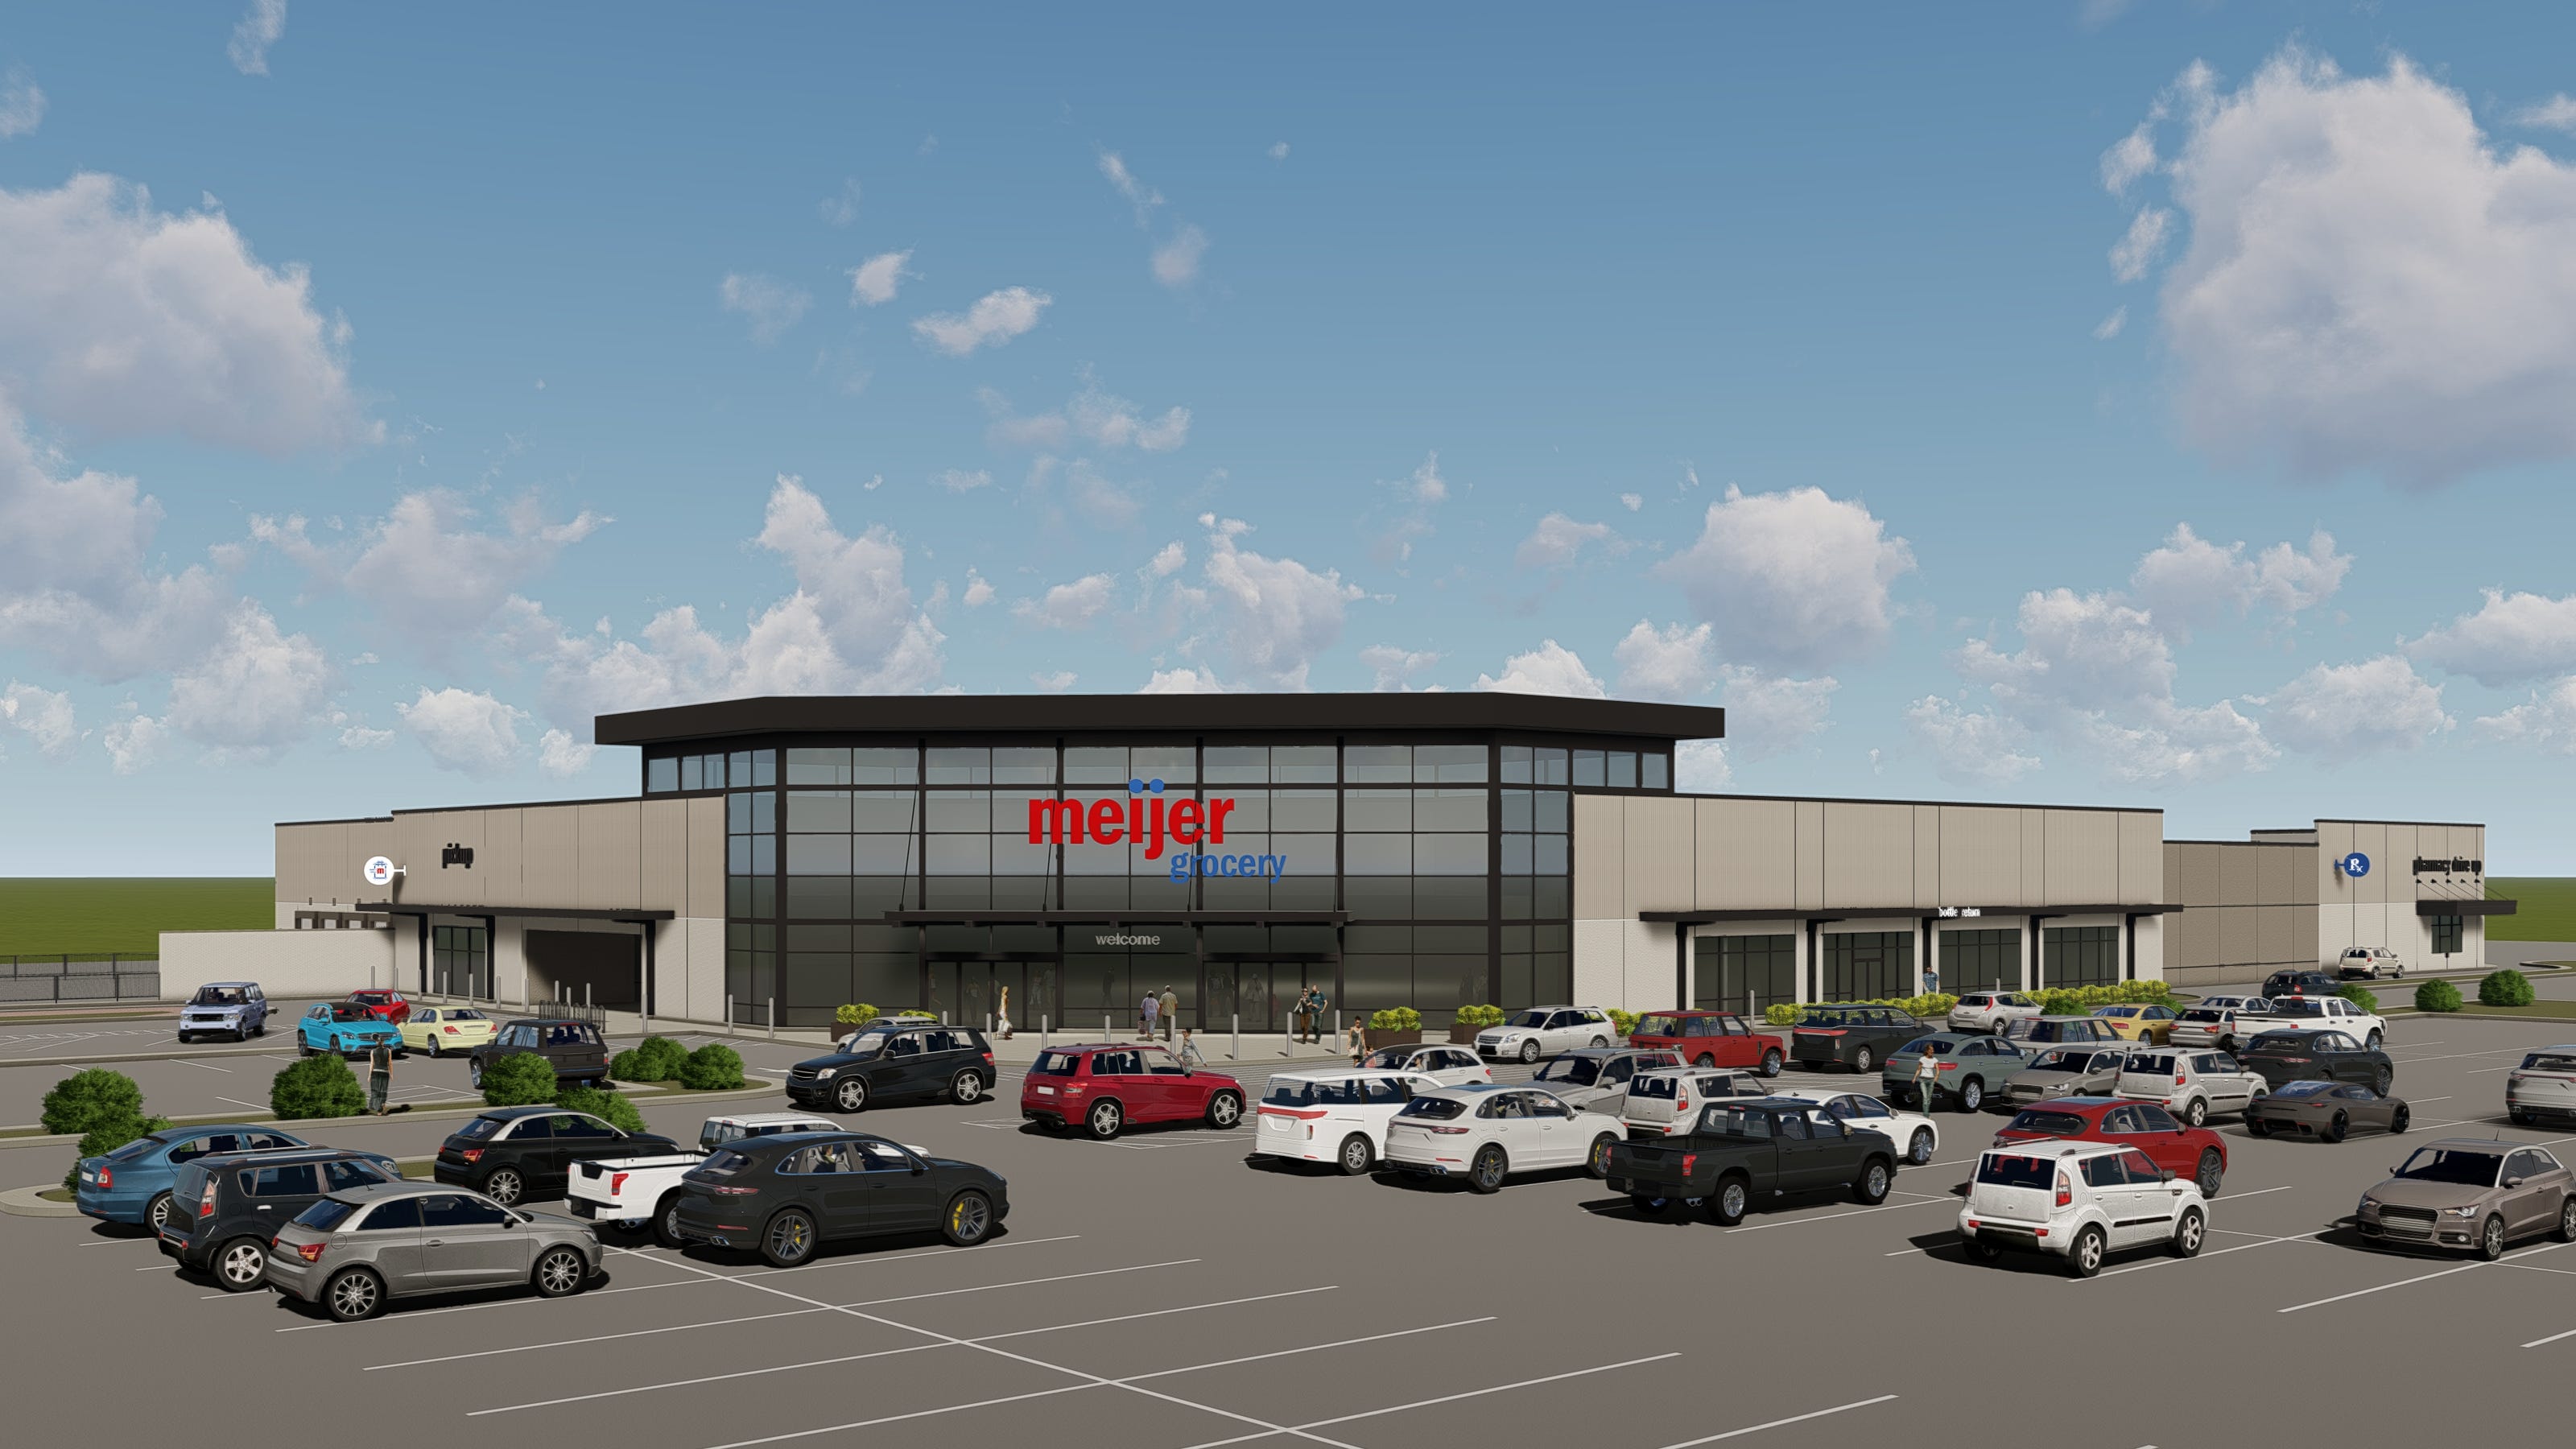 Meijer to open two small concept grocery stores in 2023